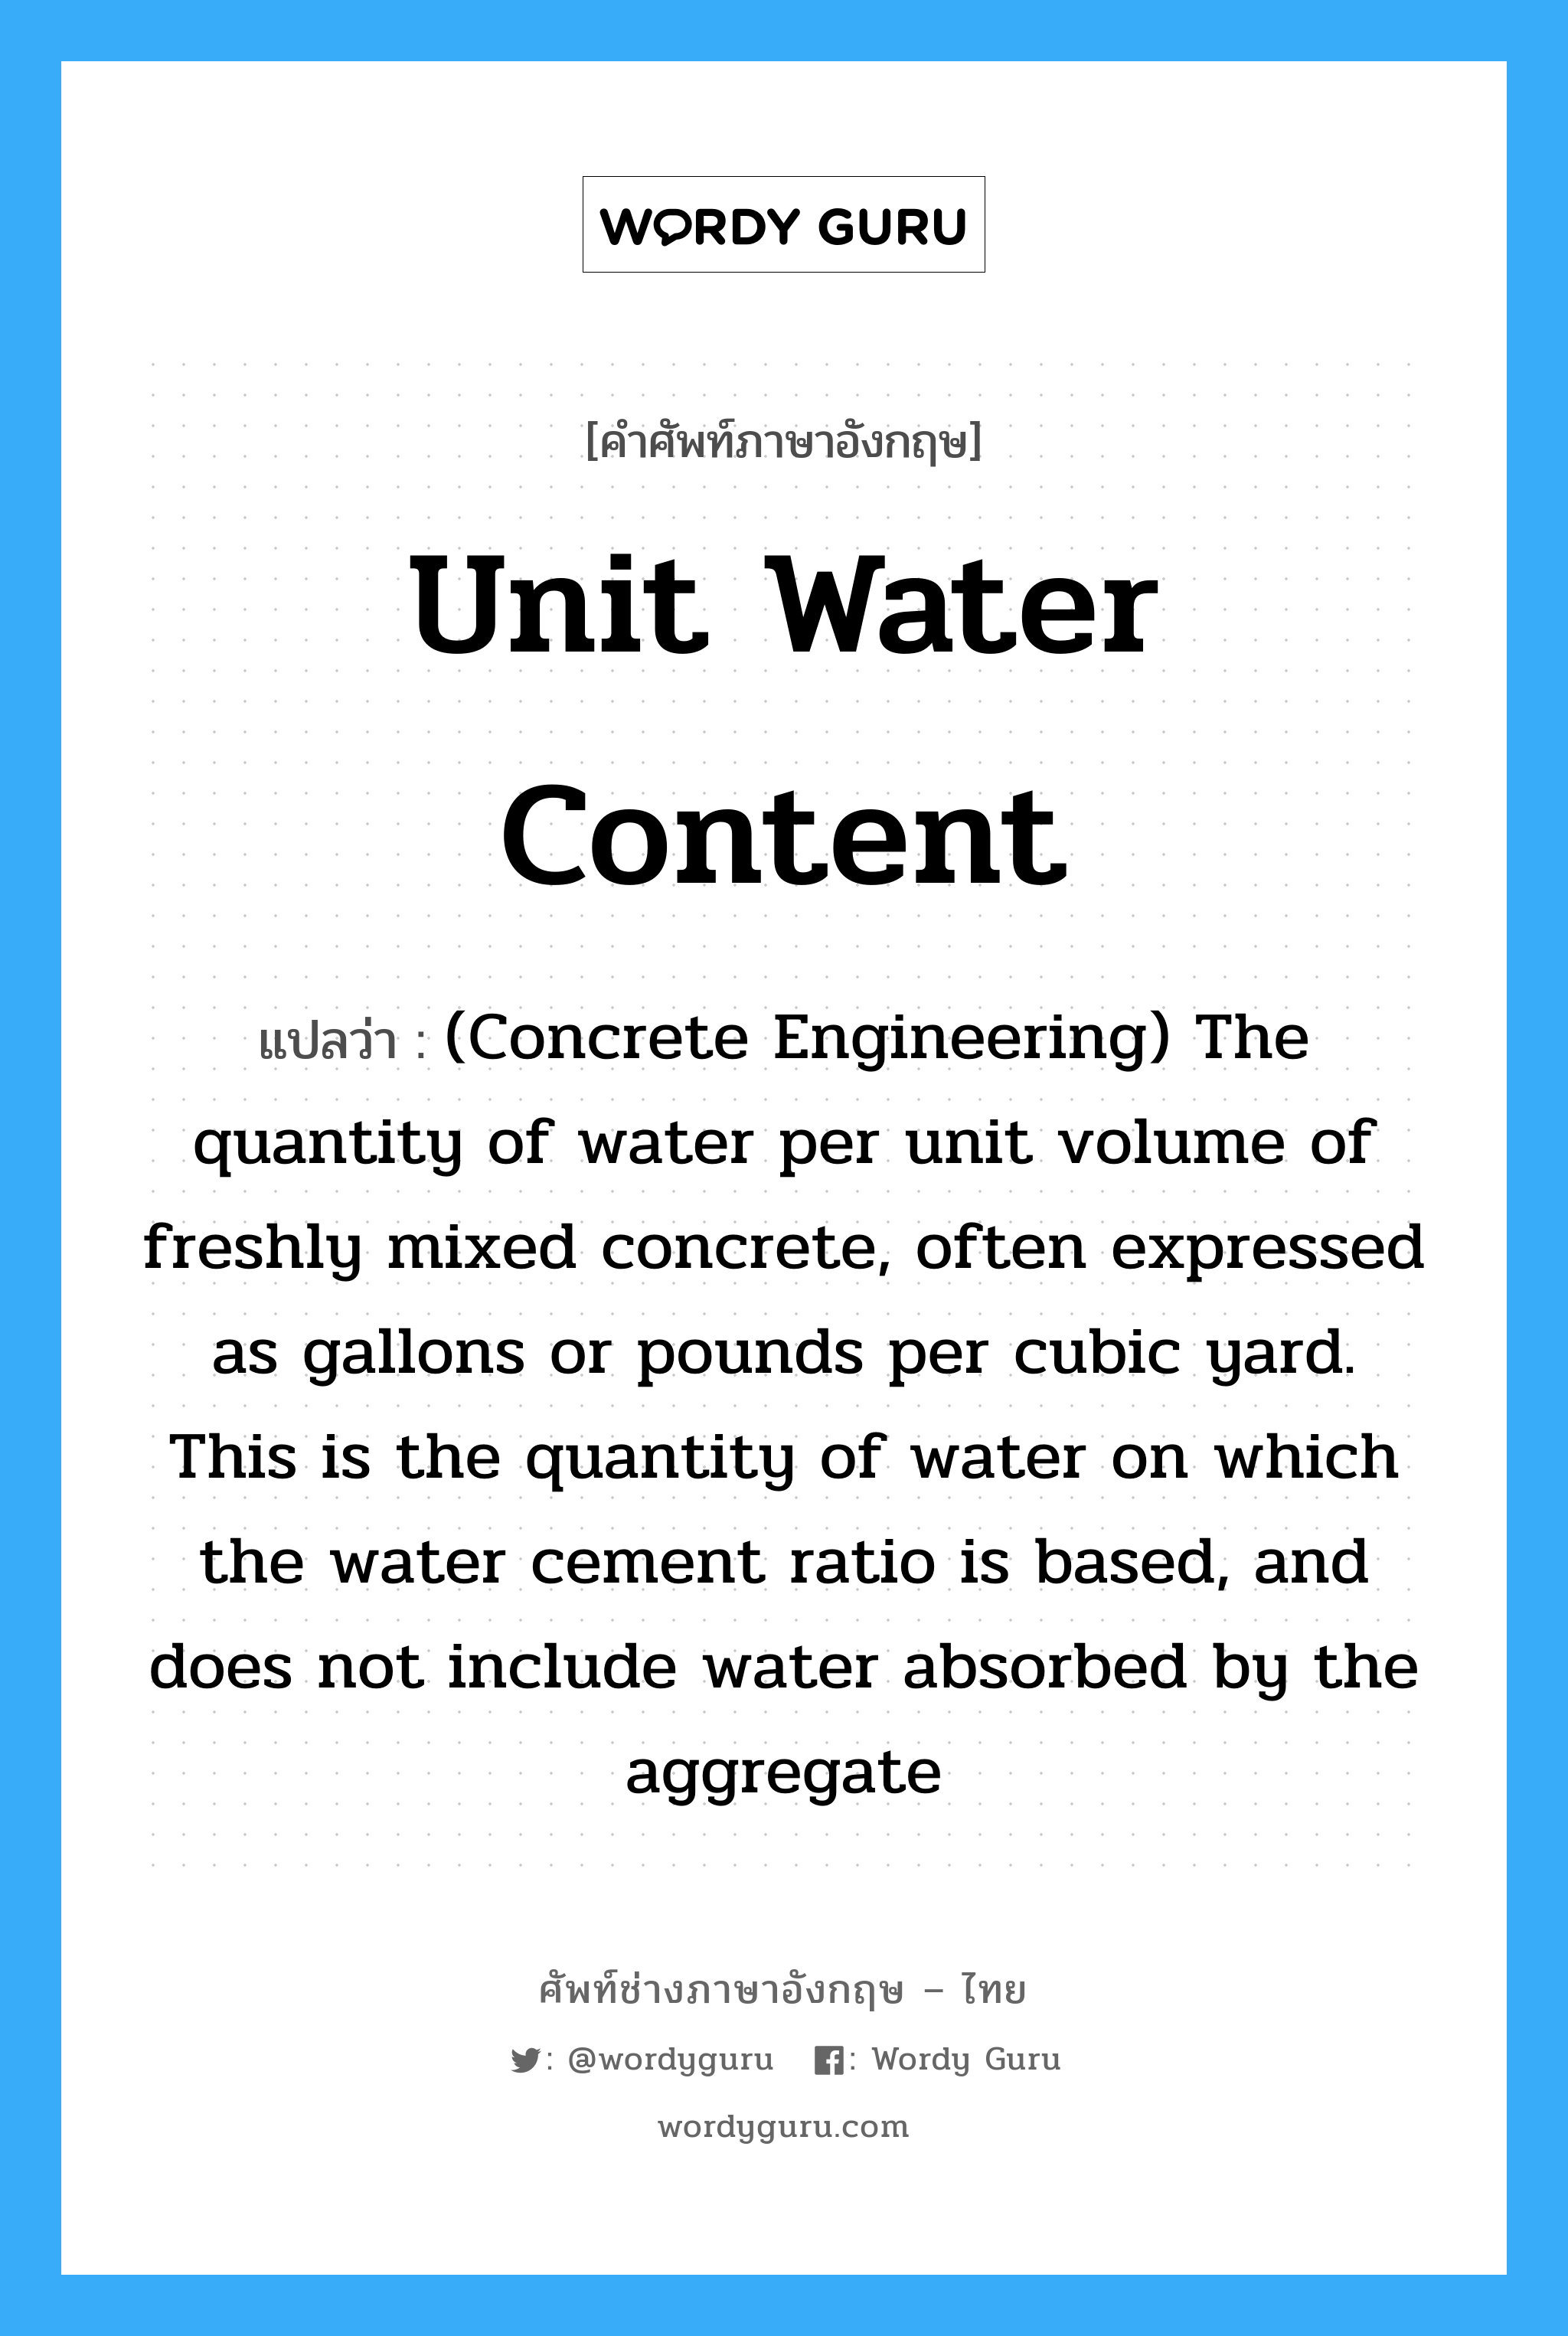 (Concrete Engineering) The quantity of water per unit volume of freshly mixed concrete, often expressed as gallons or pounds per cubic yard. This is the quantity of water on which the water cement ratio is based, and does not include water absorbed by the aggregate ภาษาอังกฤษ?, คำศัพท์ช่างภาษาอังกฤษ - ไทย (Concrete Engineering) The quantity of water per unit volume of freshly mixed concrete, often expressed as gallons or pounds per cubic yard. This is the quantity of water on which the water cement ratio is based, and does not include water absorbed by the aggregate คำศัพท์ภาษาอังกฤษ (Concrete Engineering) The quantity of water per unit volume of freshly mixed concrete, often expressed as gallons or pounds per cubic yard. This is the quantity of water on which the water cement ratio is based, and does not include water absorbed by the aggregate แปลว่า Unit Water Content